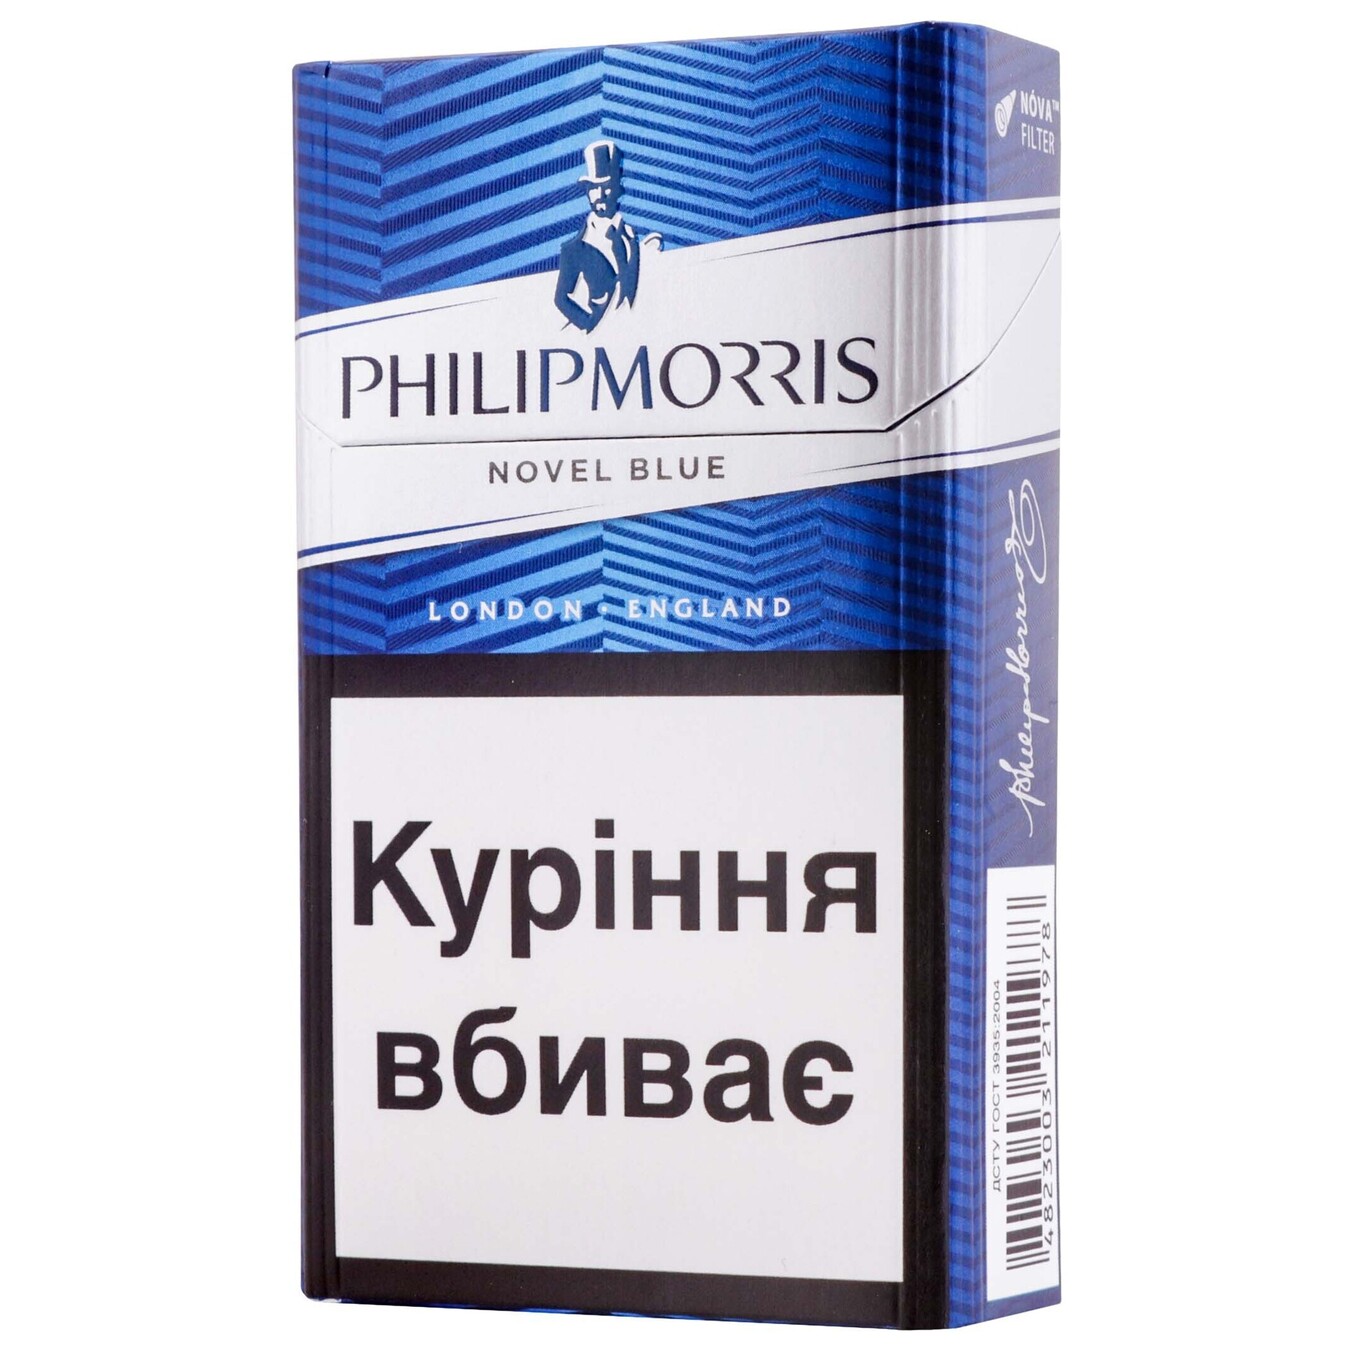 Cigarettes Philip Morris Novel Blue 20pcs (the price is indicated without excise tax) 2